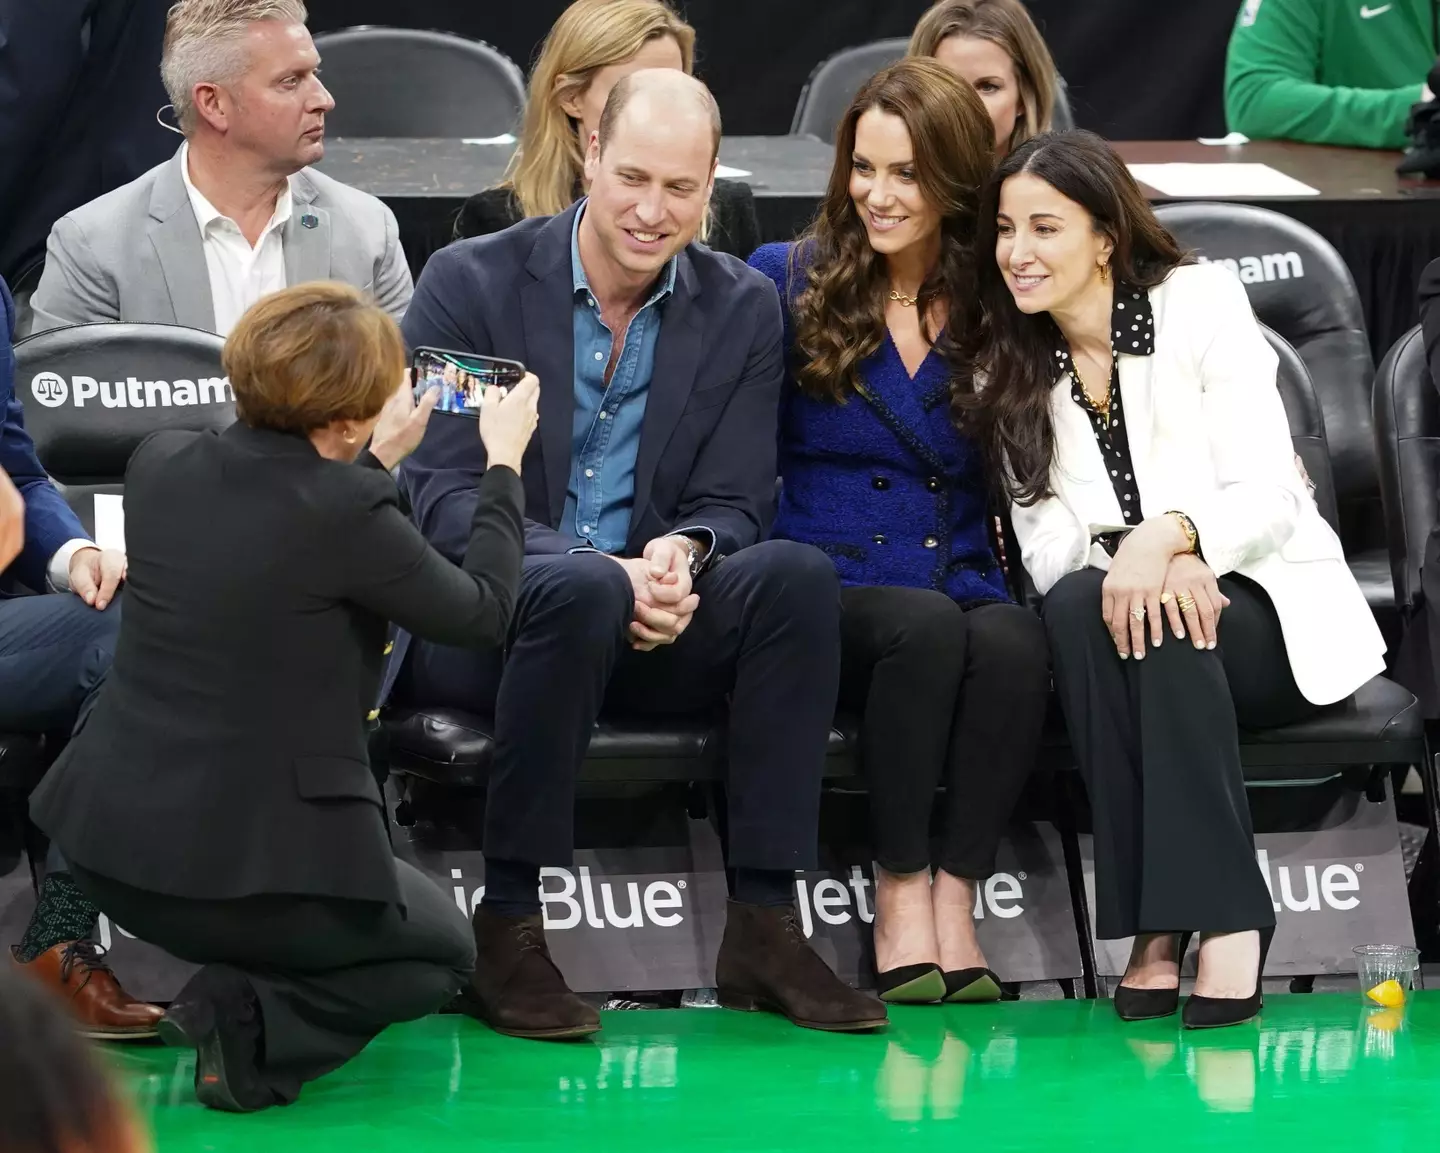 Prince William and Princess Kate at the Celtics game. (Image